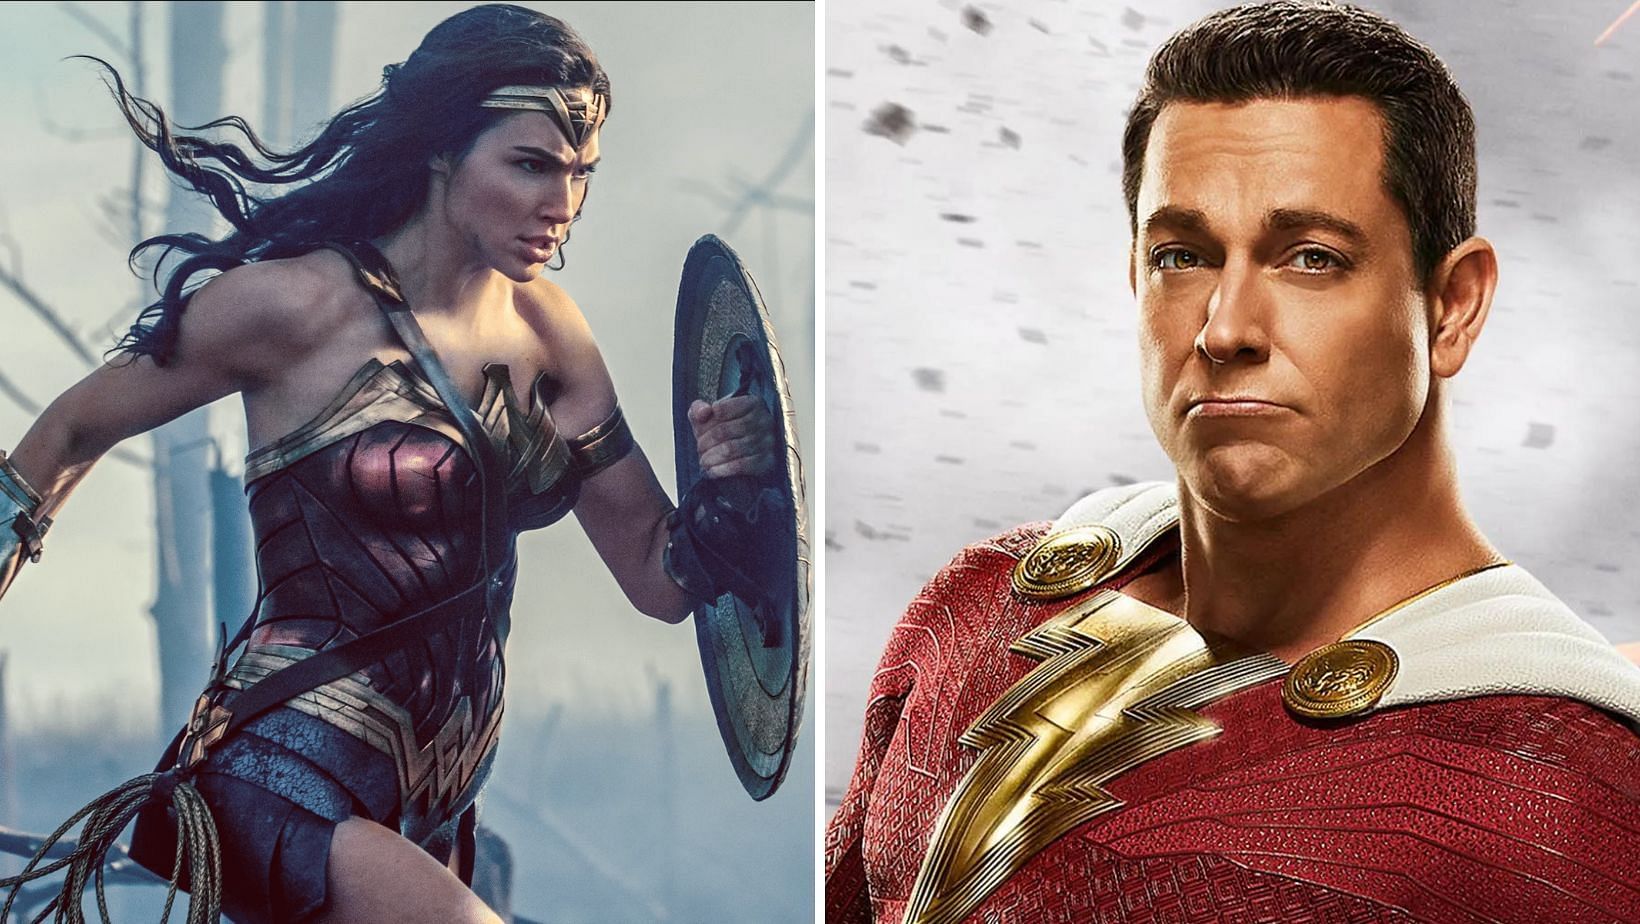 Do Shazam and Wonder Woman have a shared history in comics